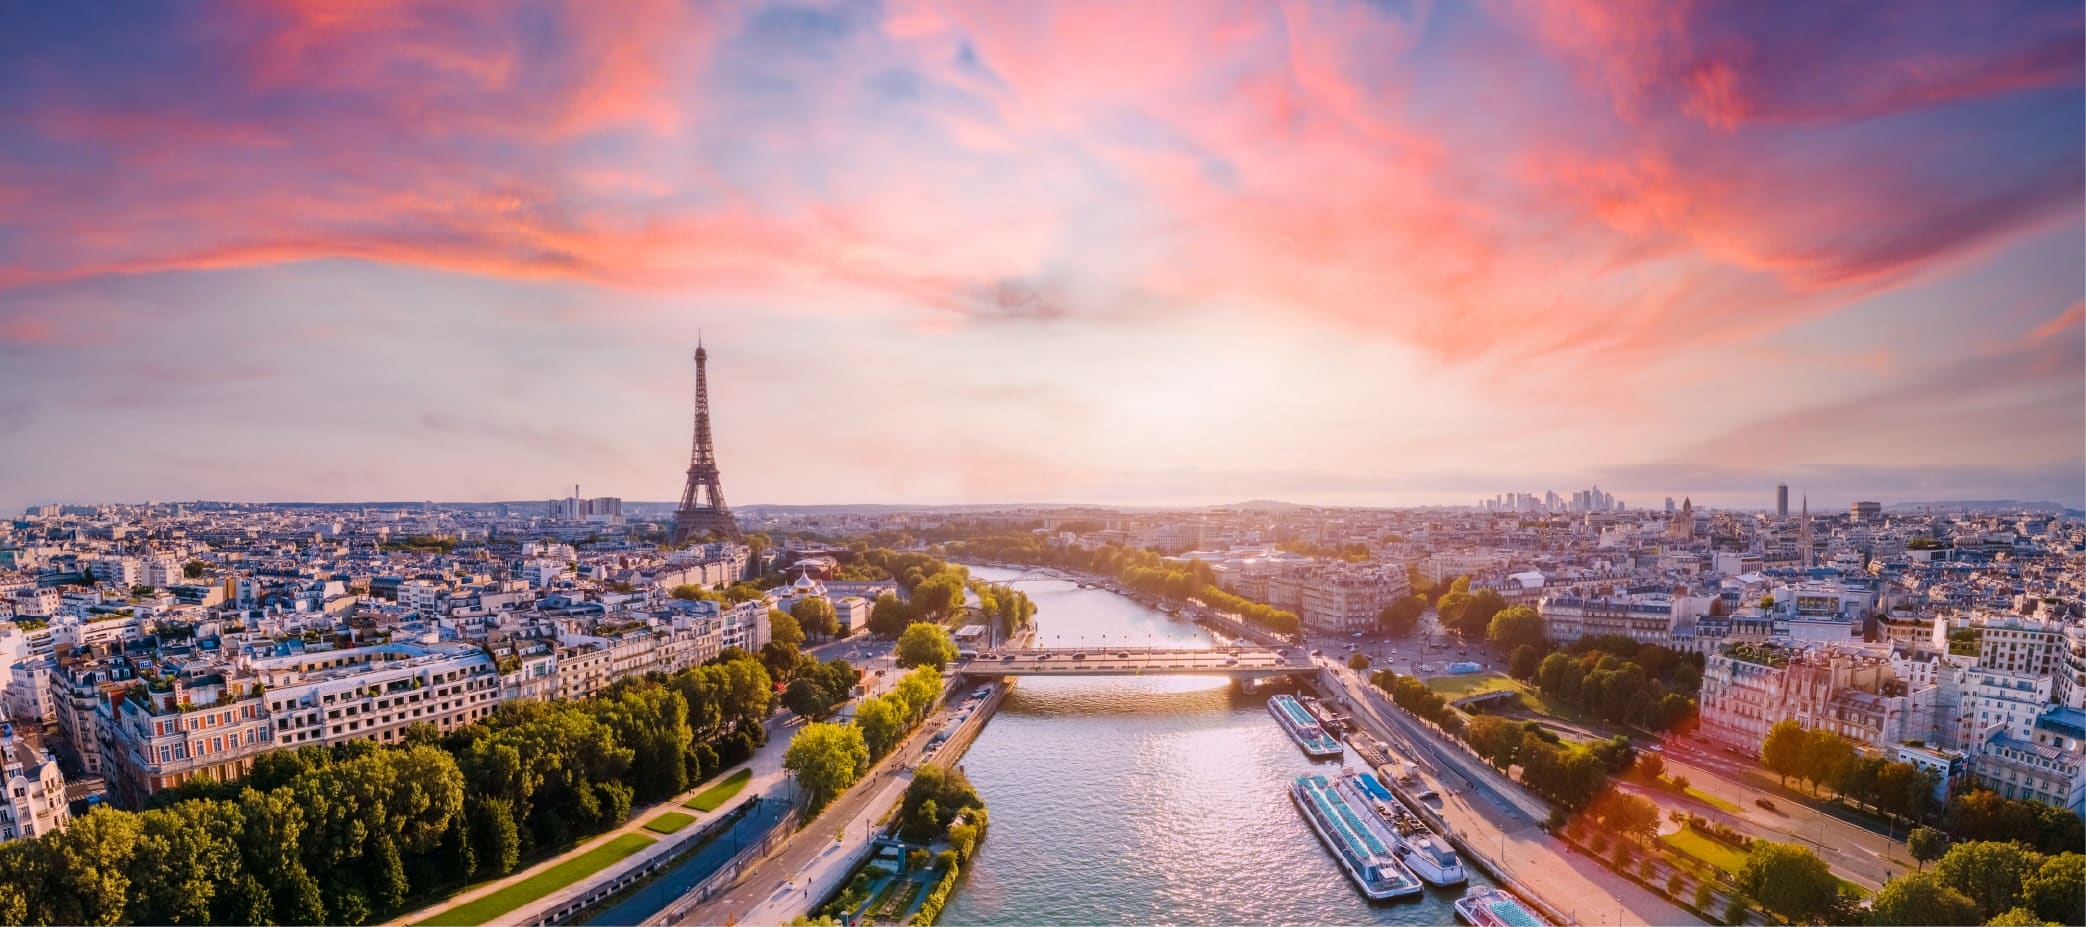 paris tickets tours and attractions - Paris Tickets